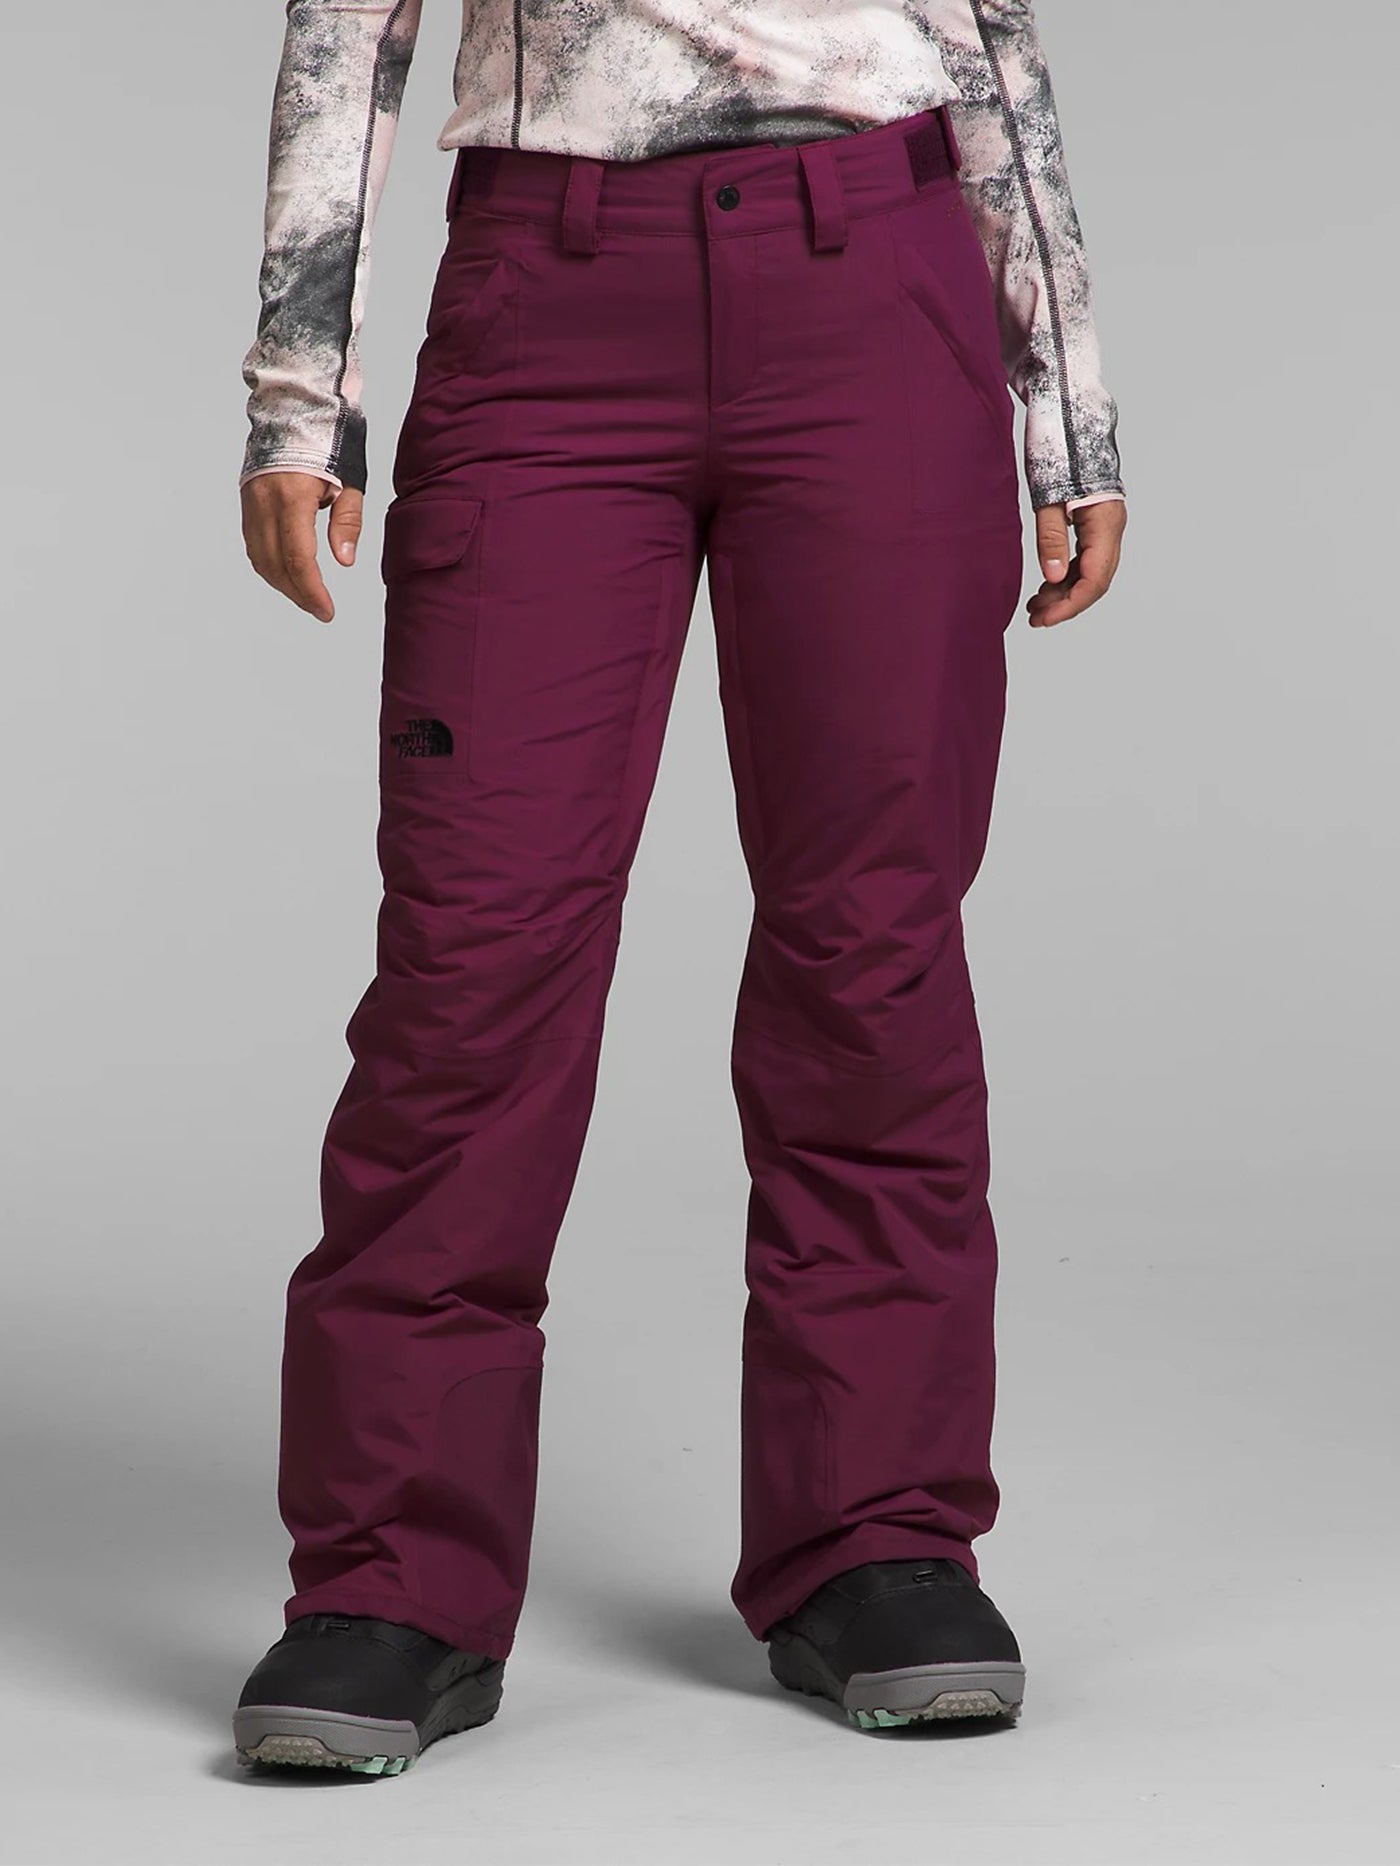 Freedom Insulated Snow Pants - Women's